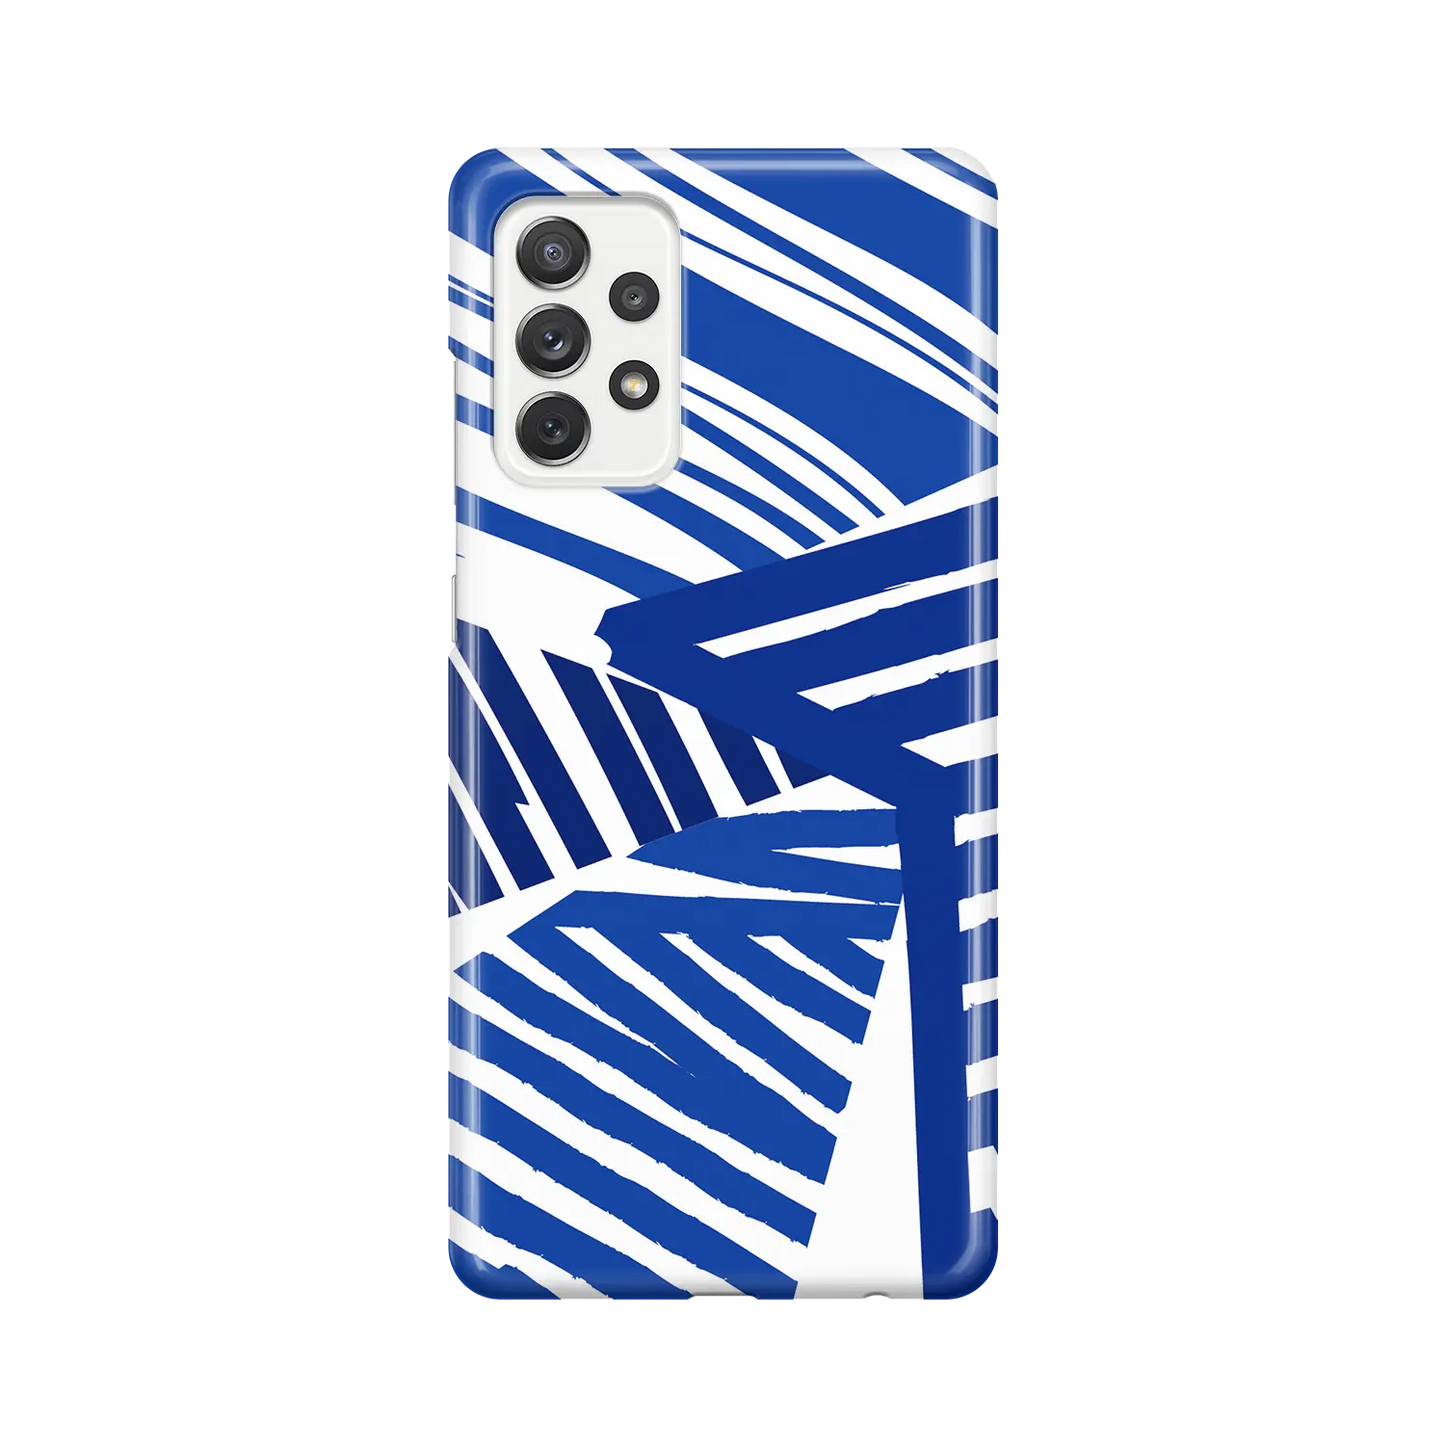 Stripes - Personalised Galaxy A Case